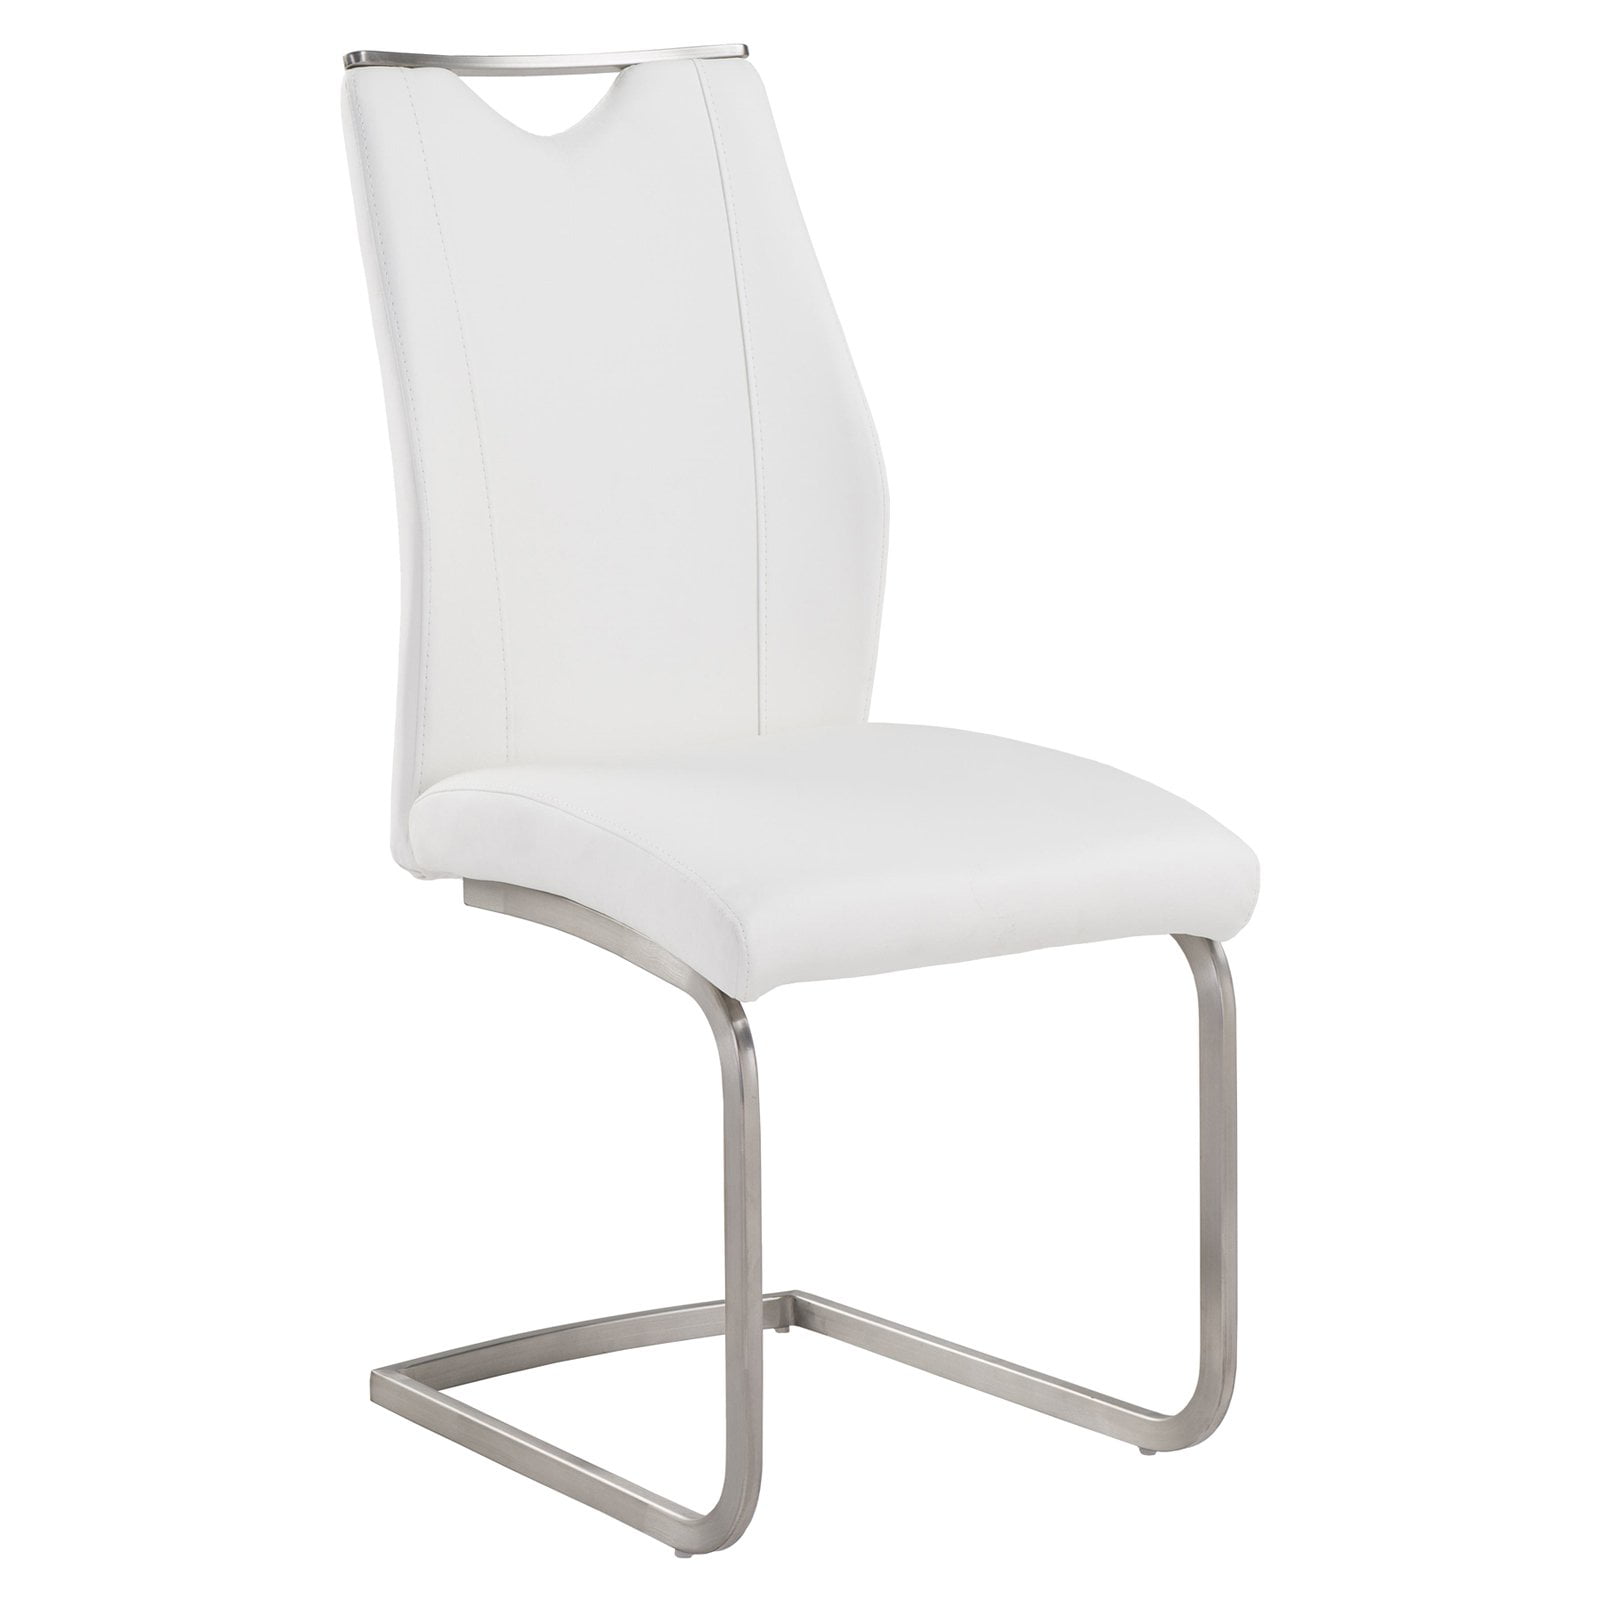 Lcbrsiwh Bravo Contemporary Side Chair In White And Stainless Steel